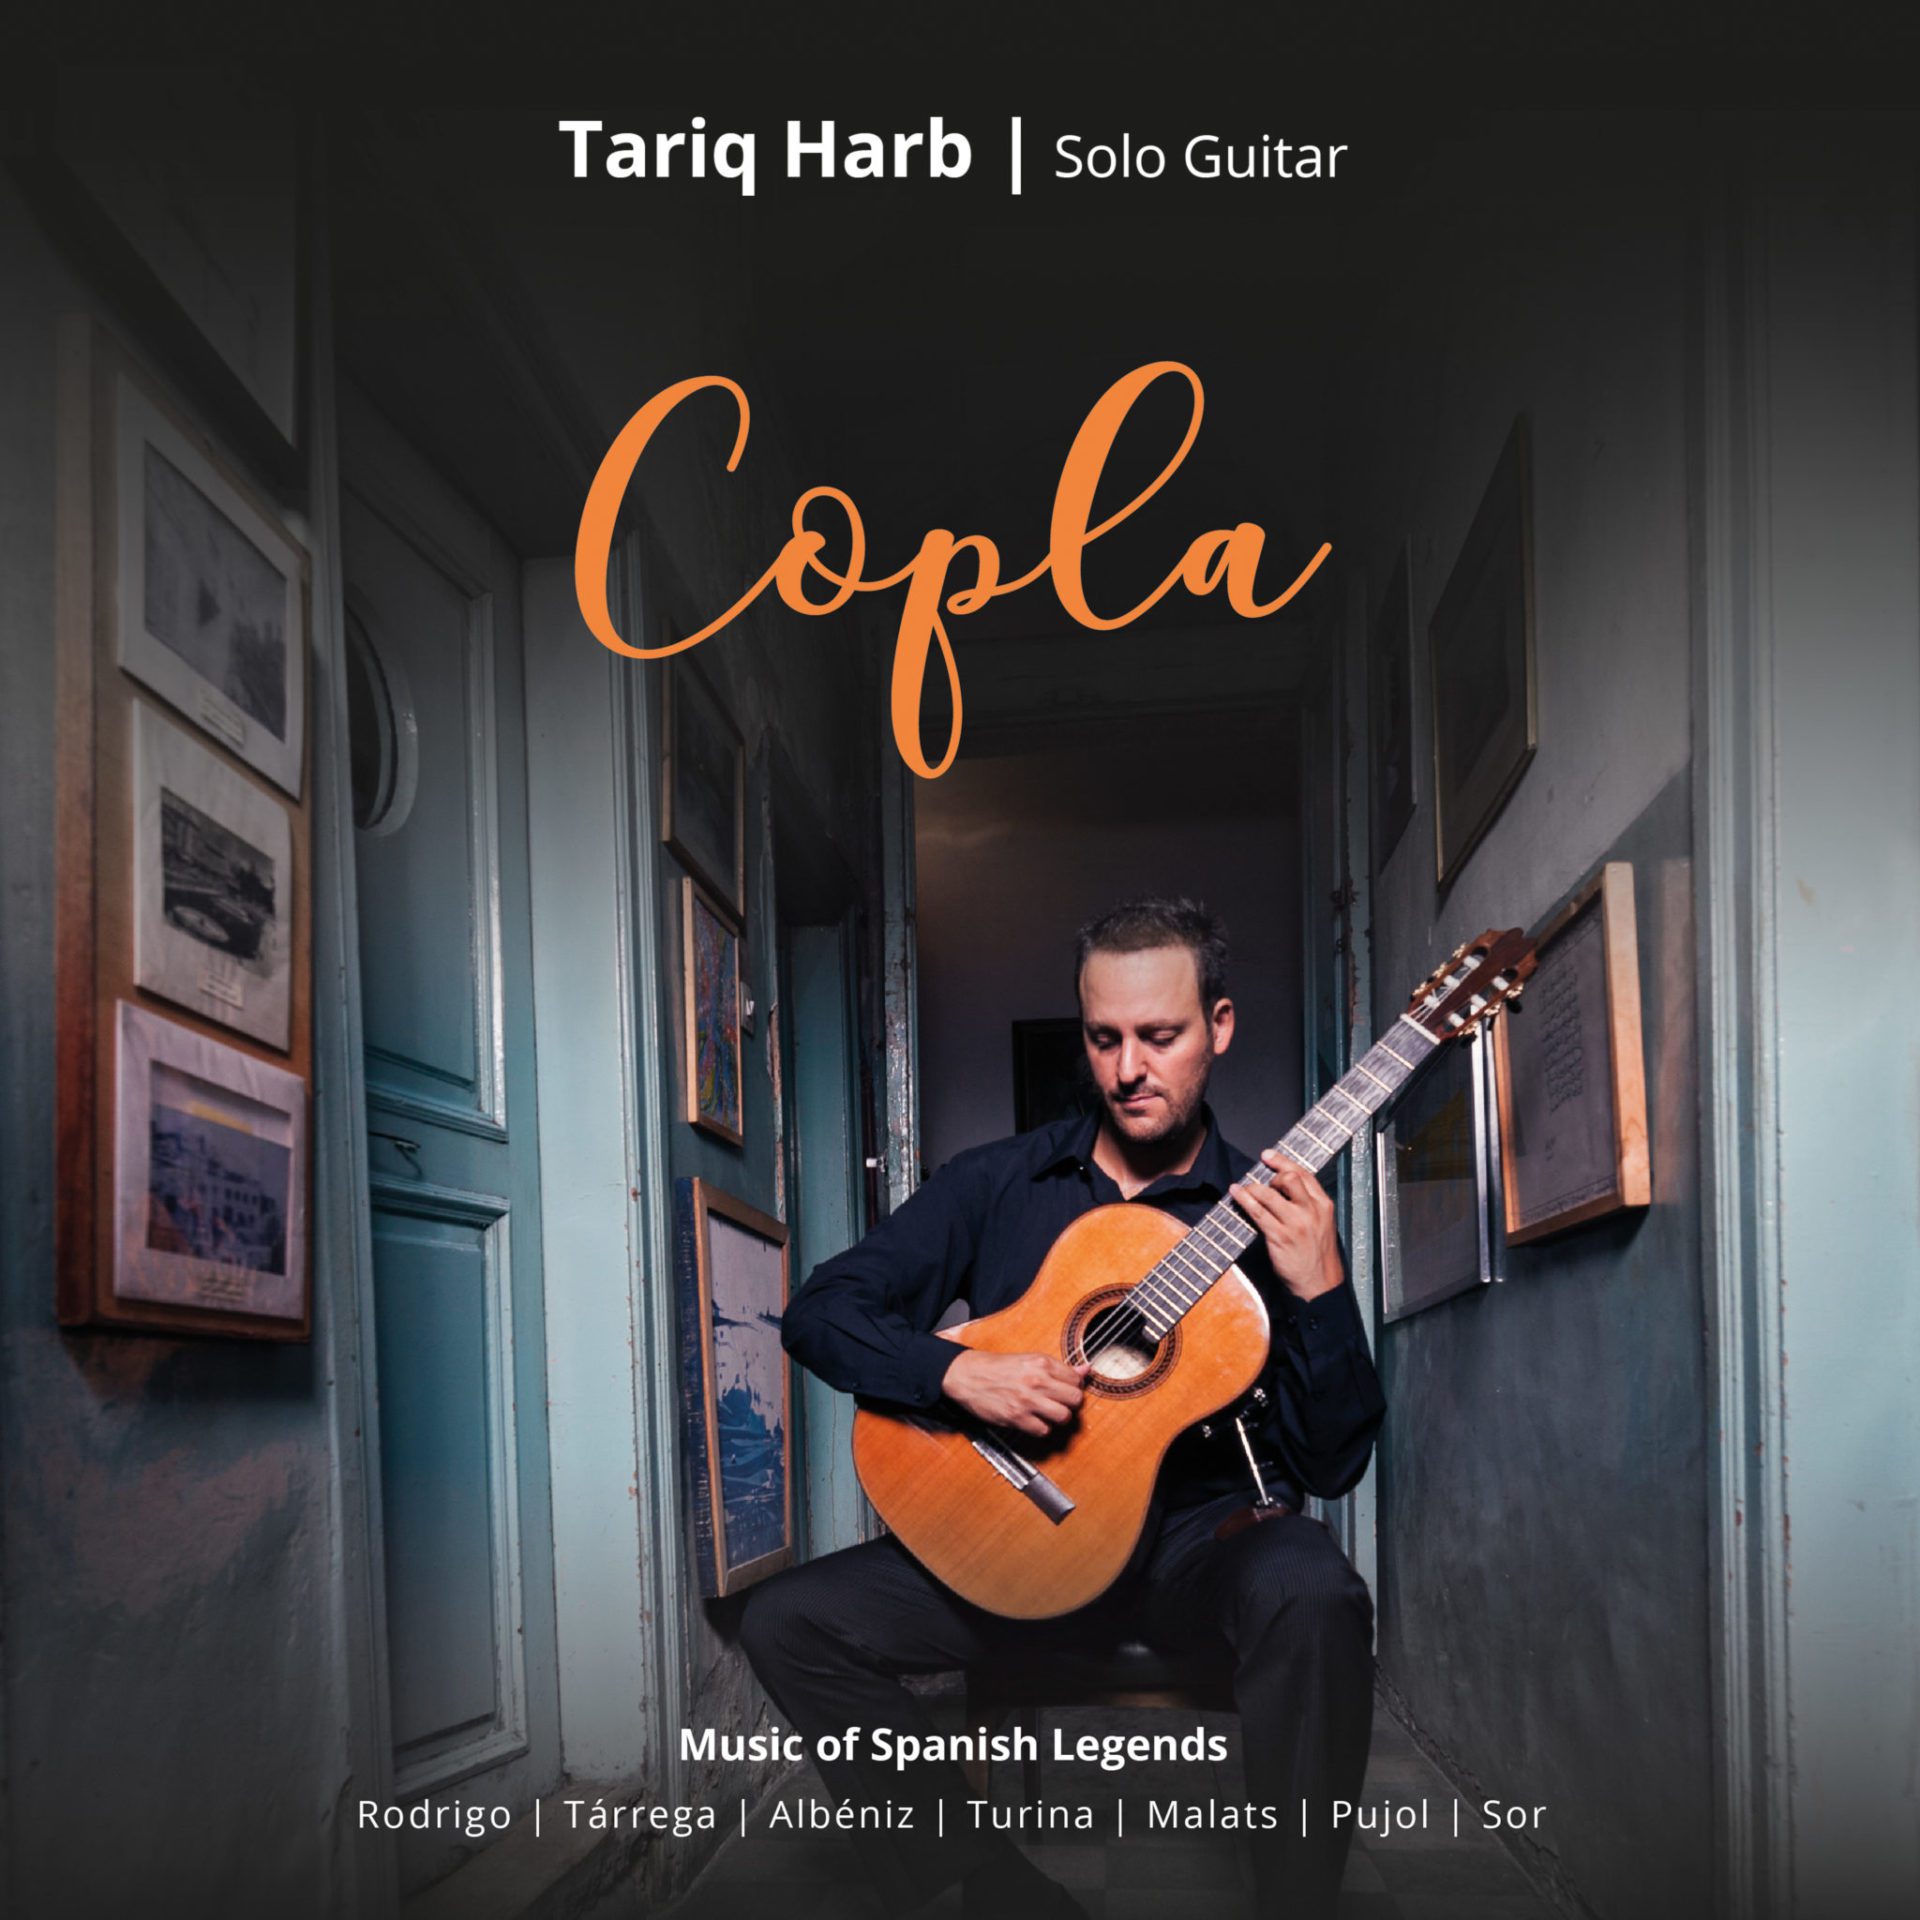 New Review From ‘this is classical guitar’ on Copla